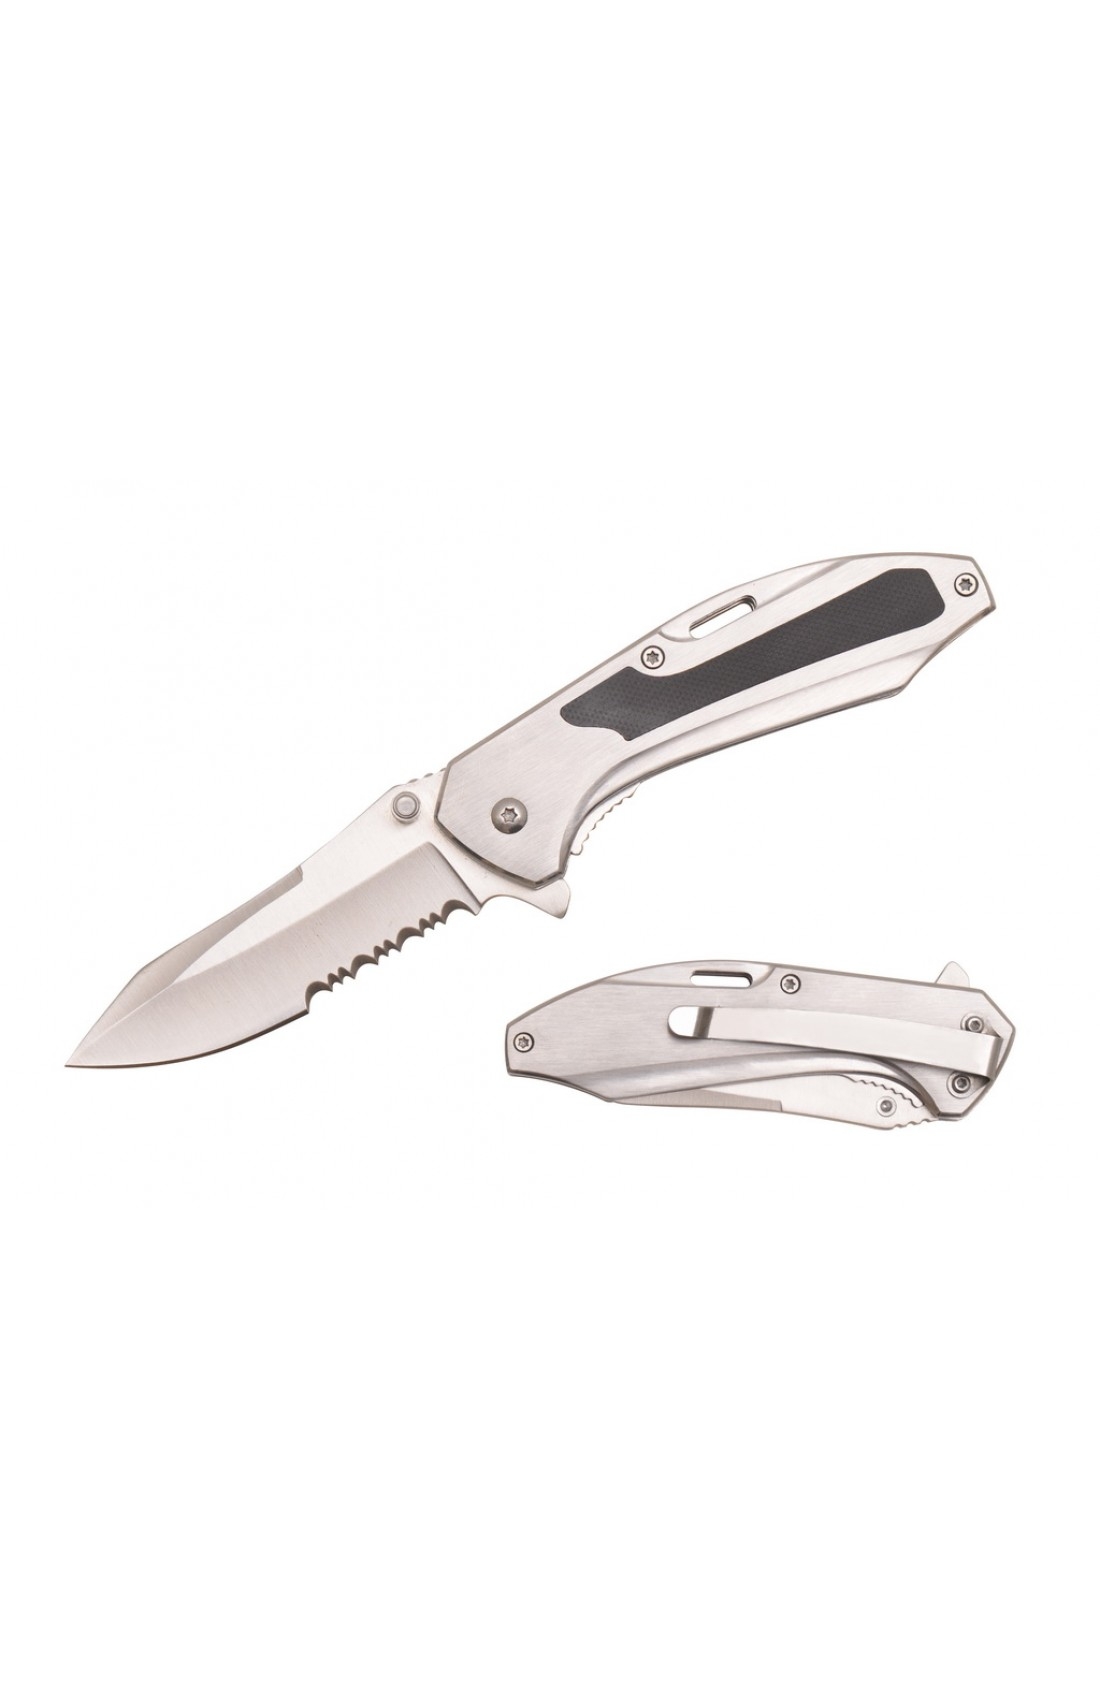 KNIFE T27097-2 Spring Assist KNIFE w/ G10 Inlay